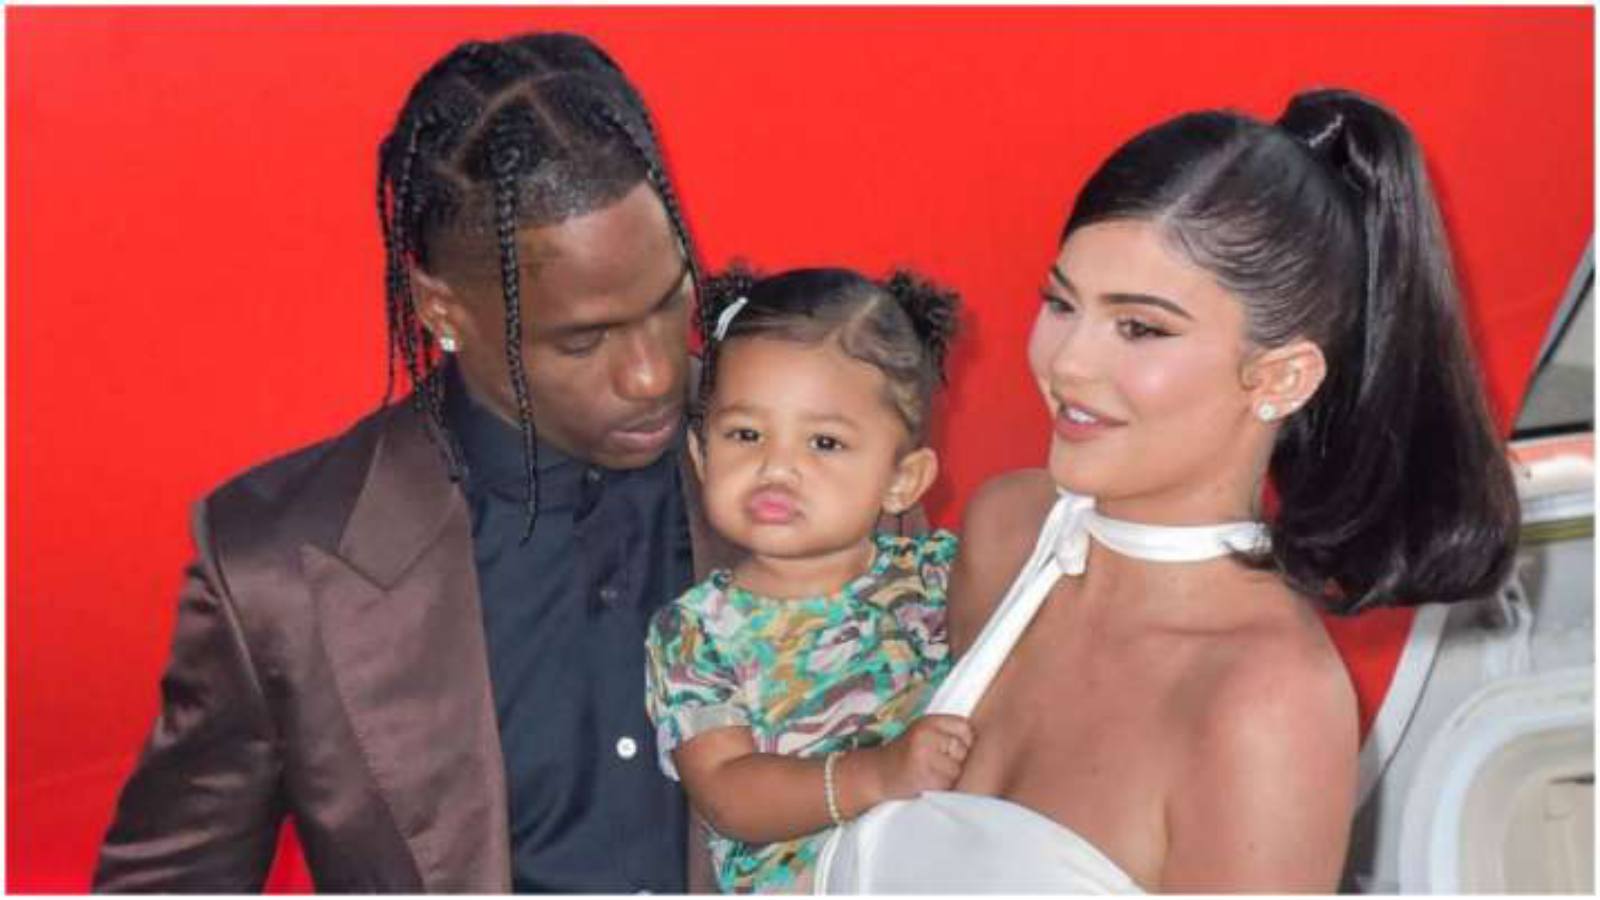 Travis Scott and Kylie Jenner with daughter Stormi Webster